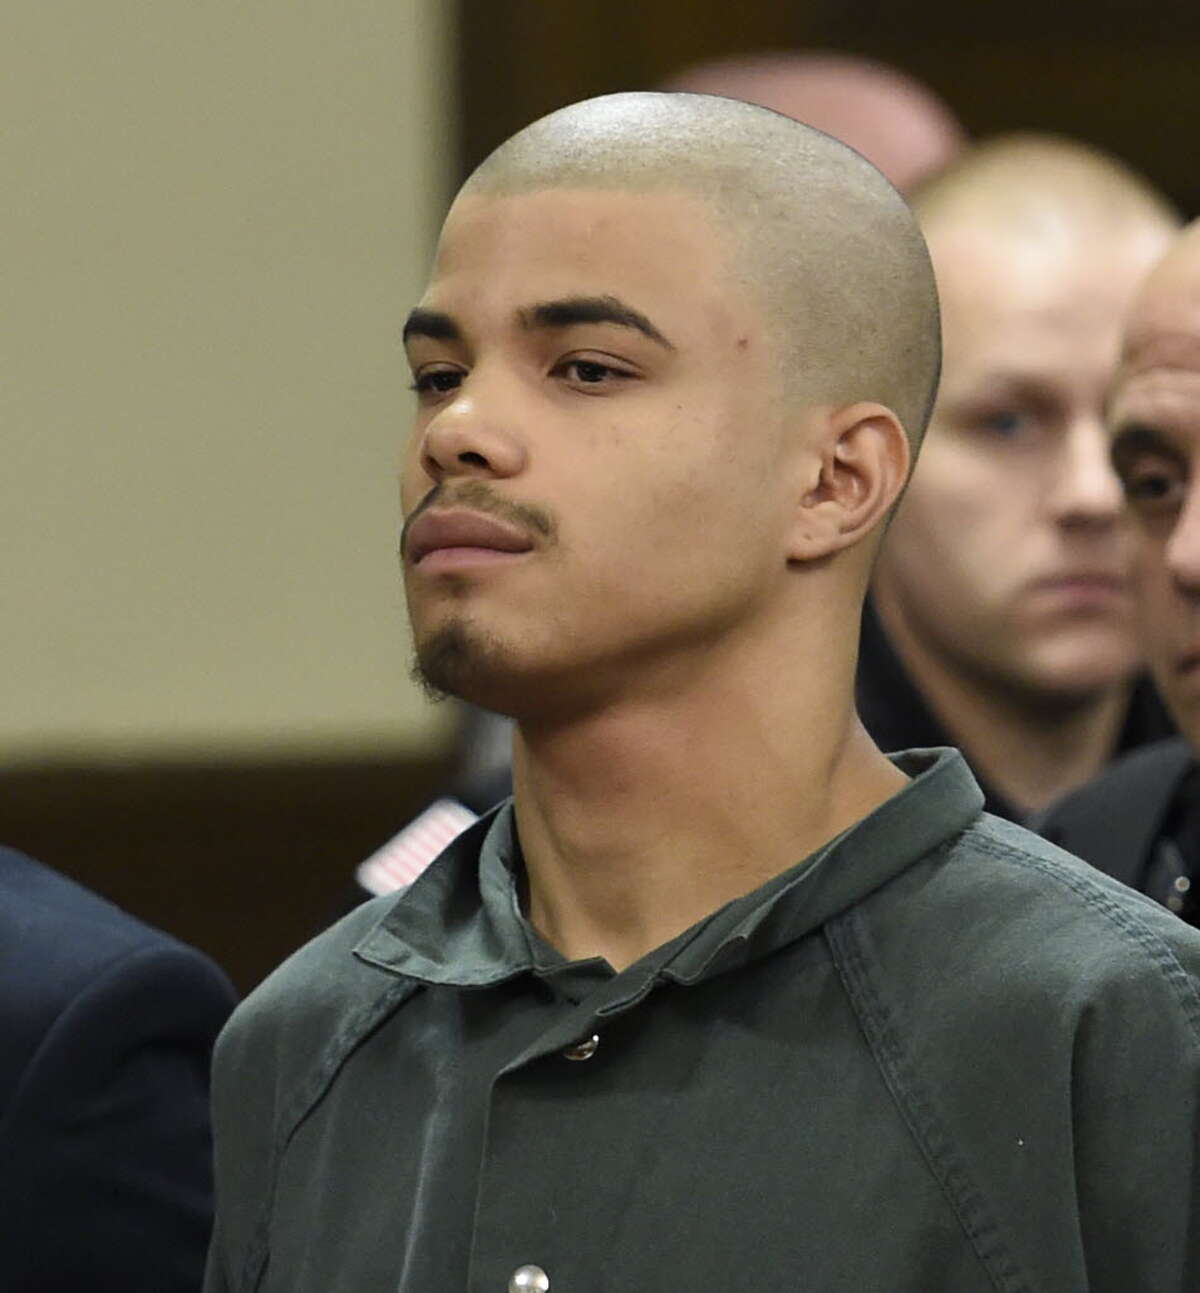 Gabriel Vega, center, was arraigned on numerous charges including murder in connection with the Vanessa Milligan murder case in Rensselaer County Court on Thursday morning October 23, 2014 in Troy.  (Times Union file)